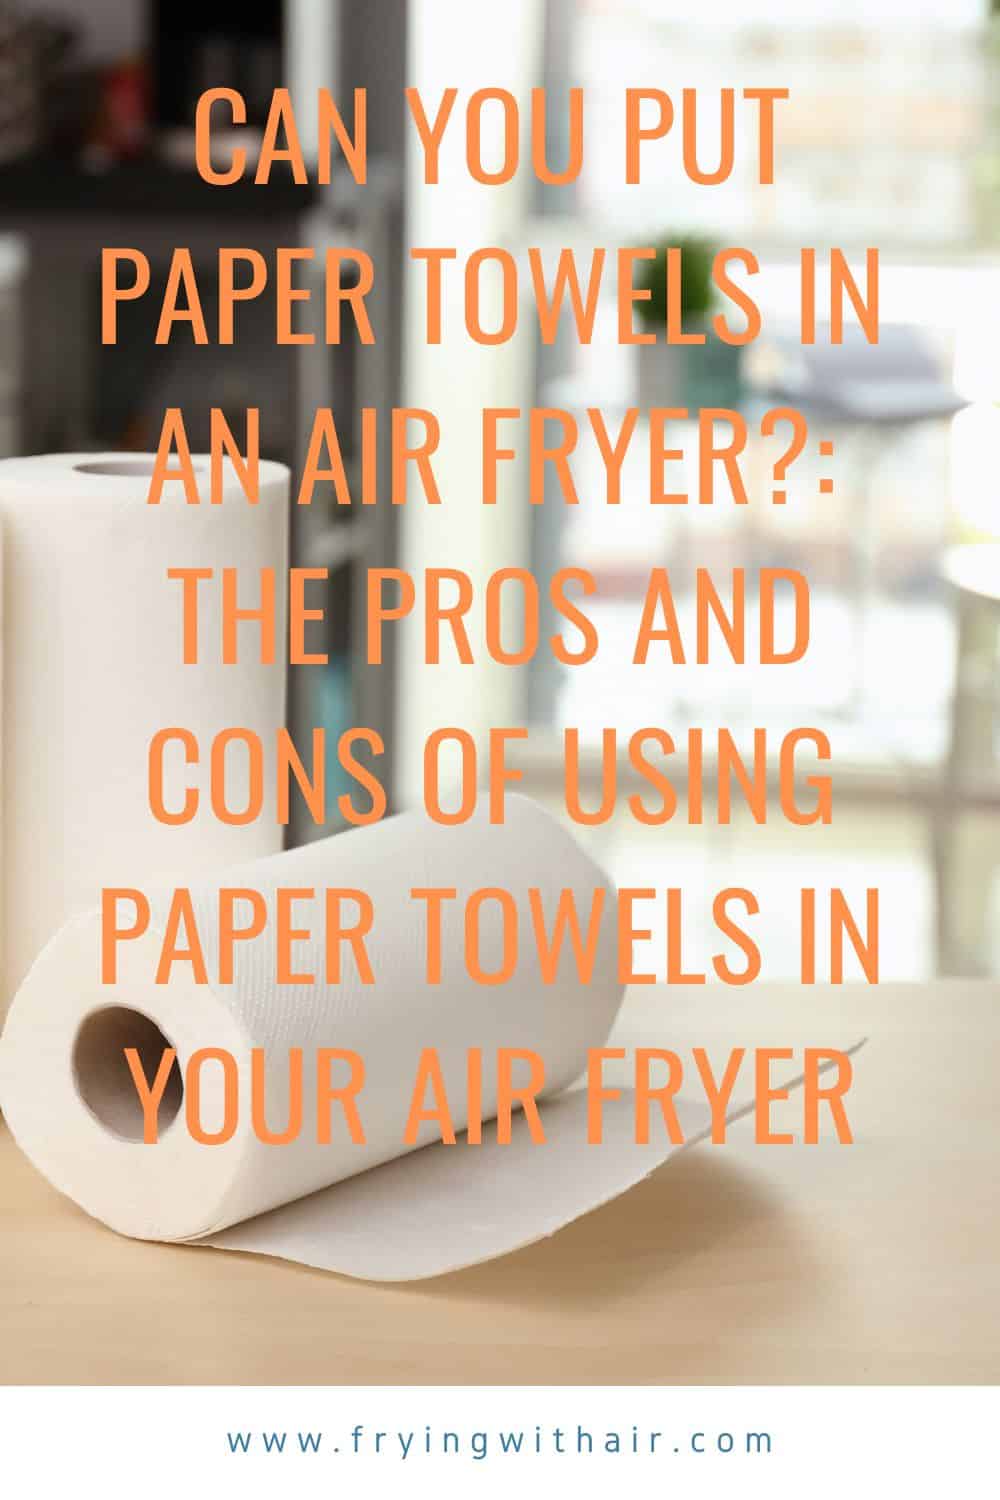 Can You Put Paper Towels in an Air Fryer (1)